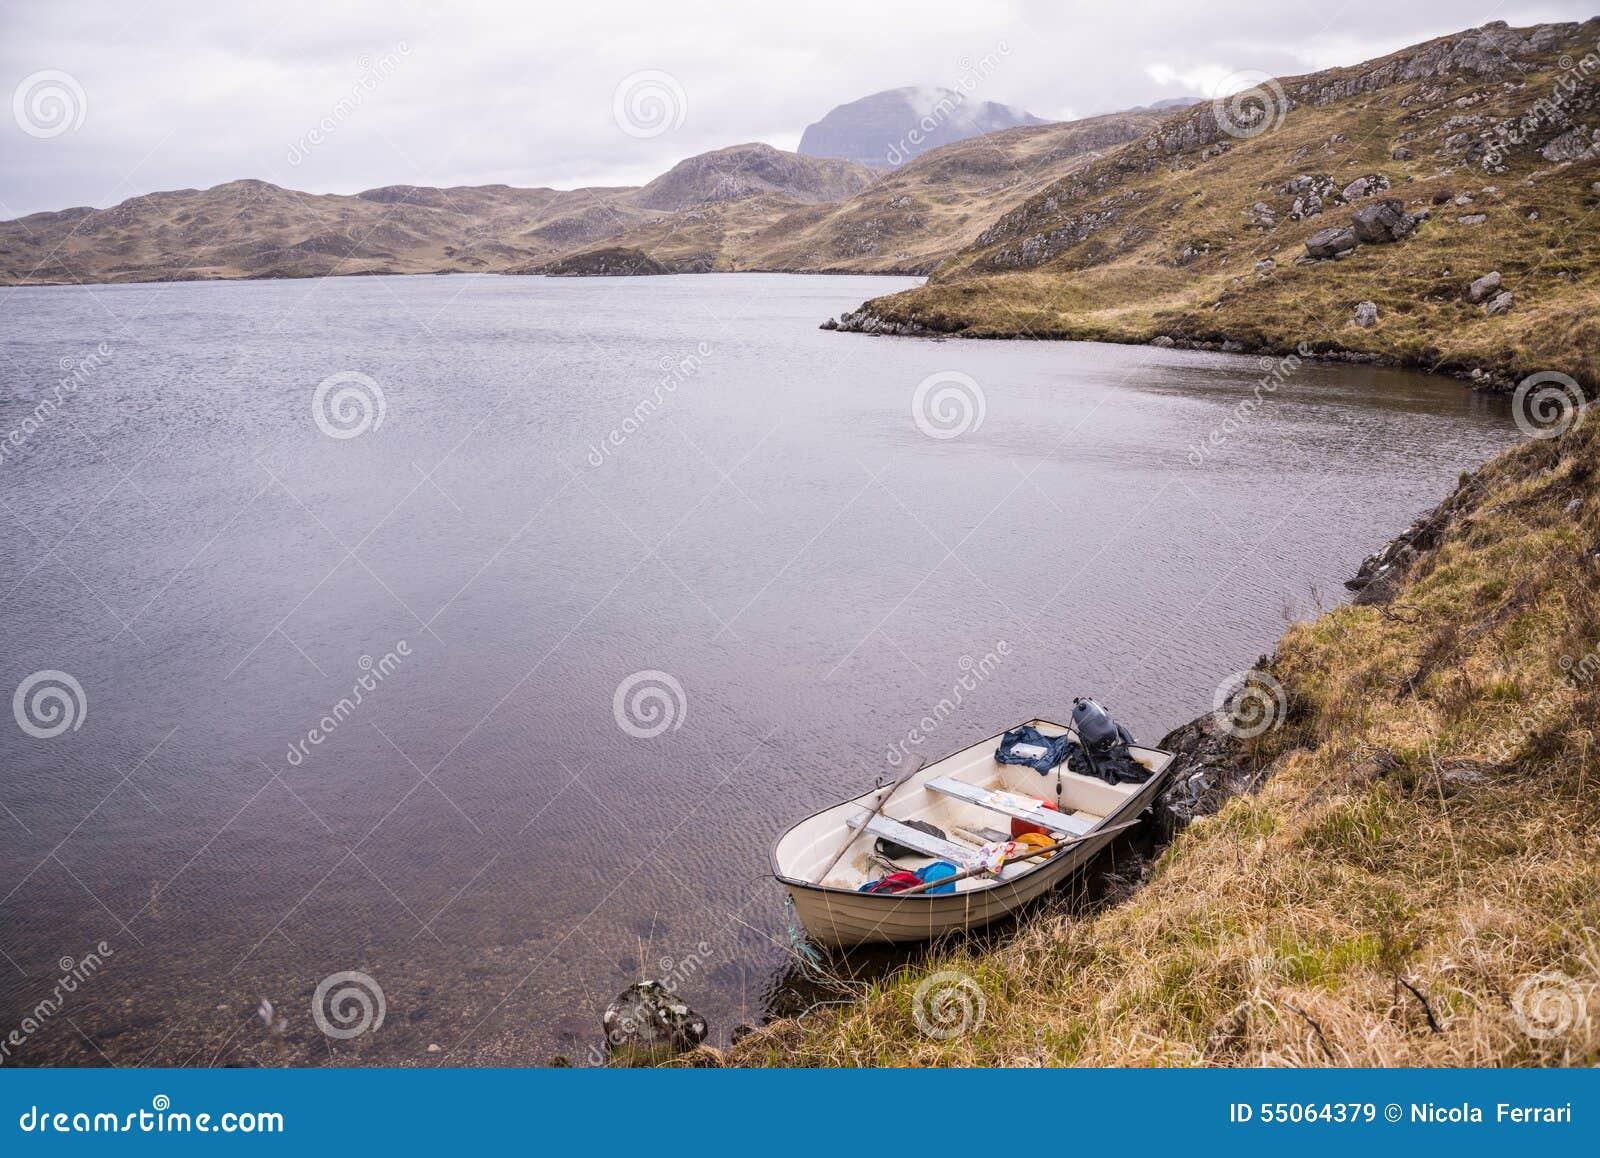 White Fishing Boat Near The Shore Of A Wild Loch Stock Photo - Image ...